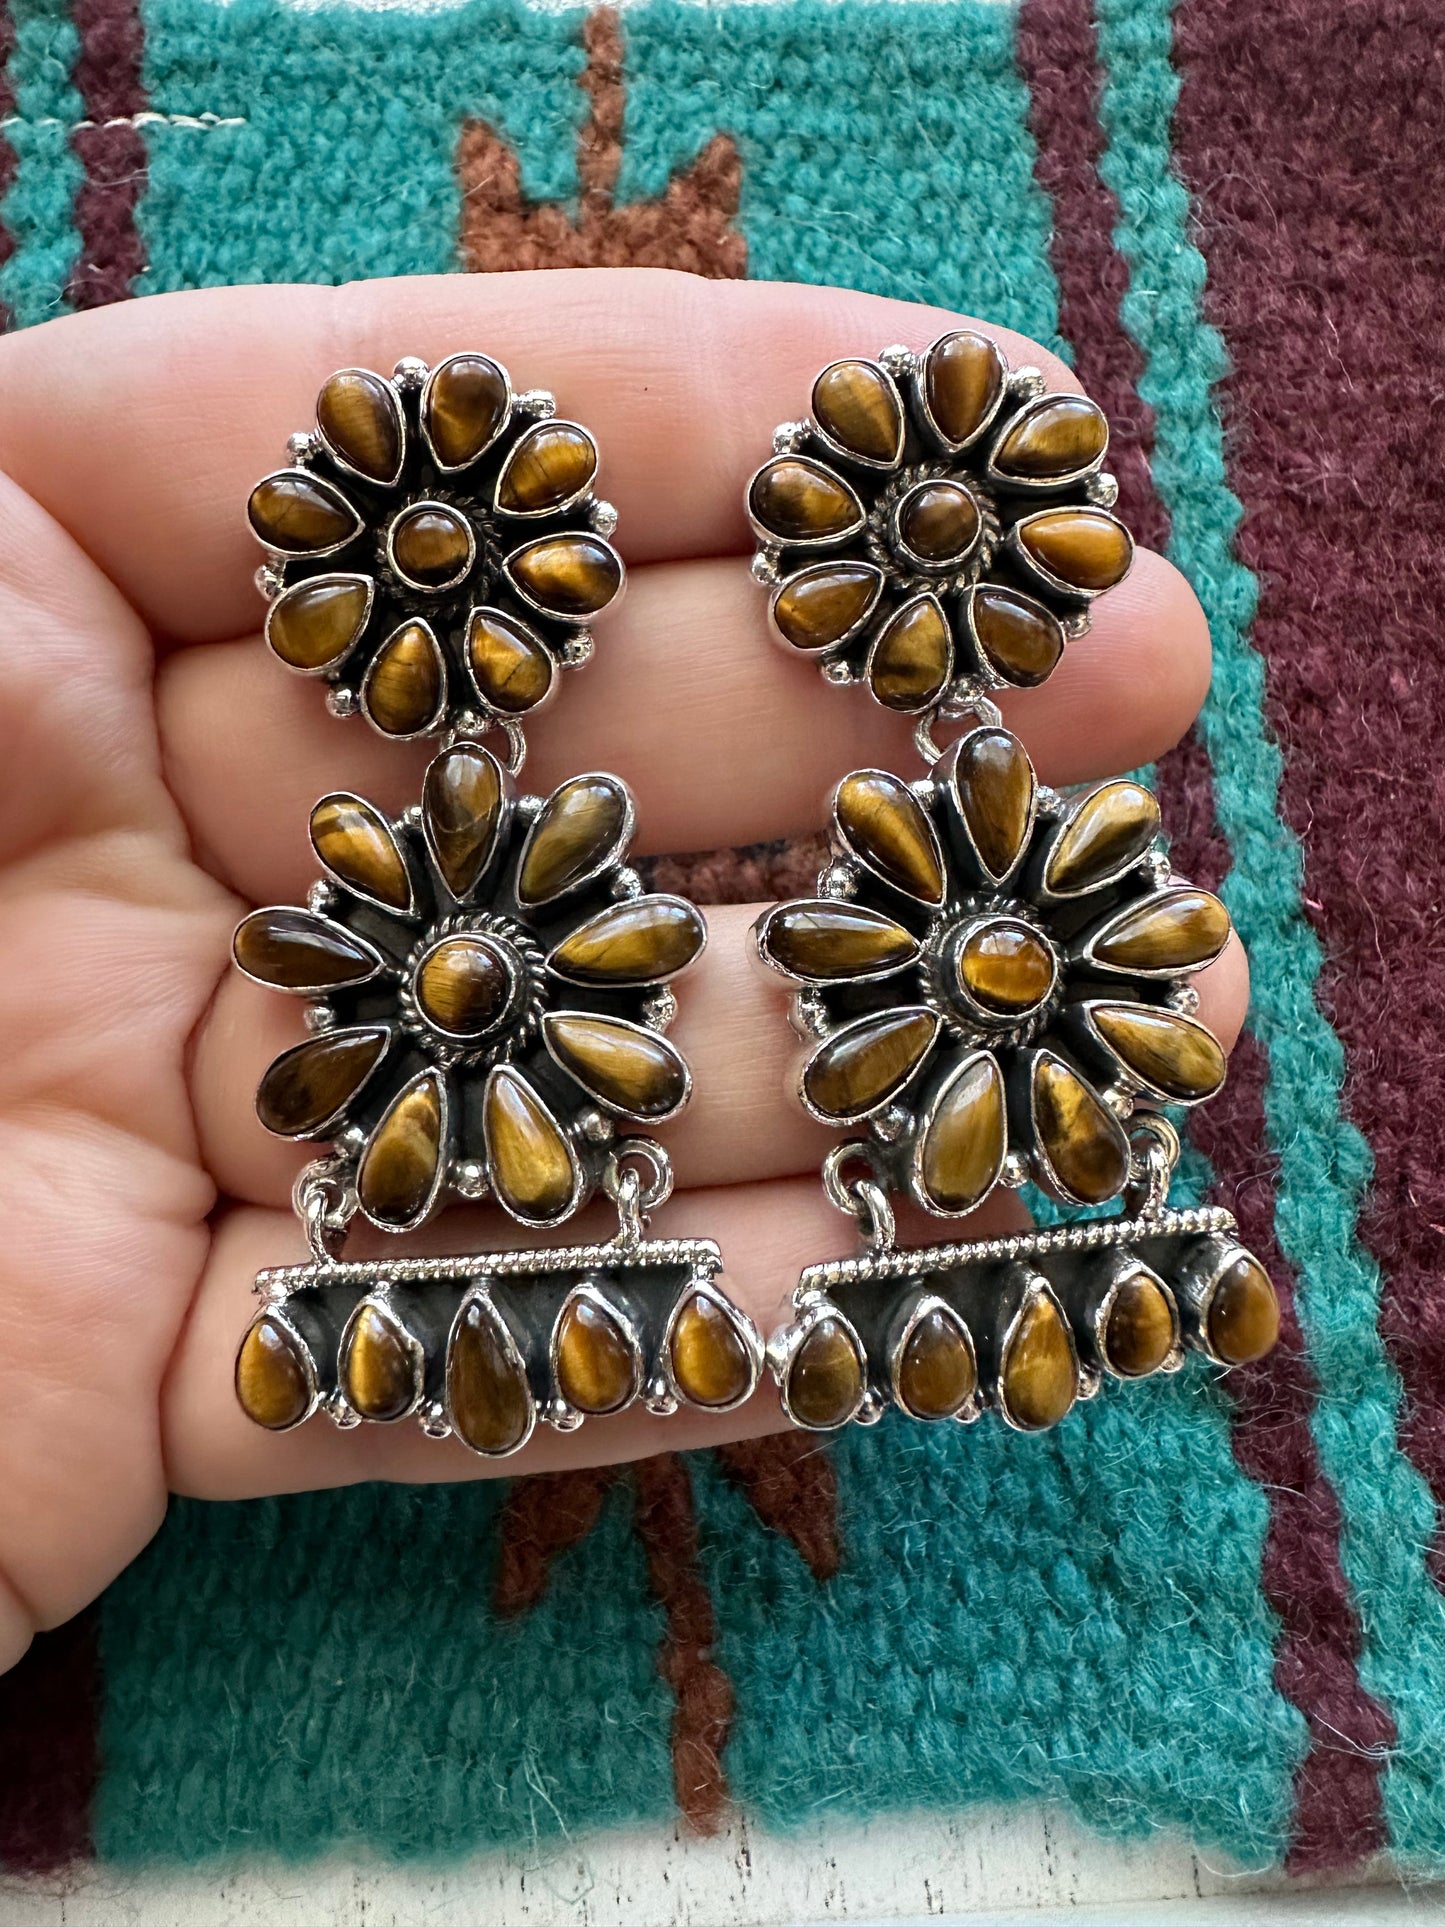 “Cowboy Charms” Handmade Flower Tigers Eye and Silver Silver Dangles